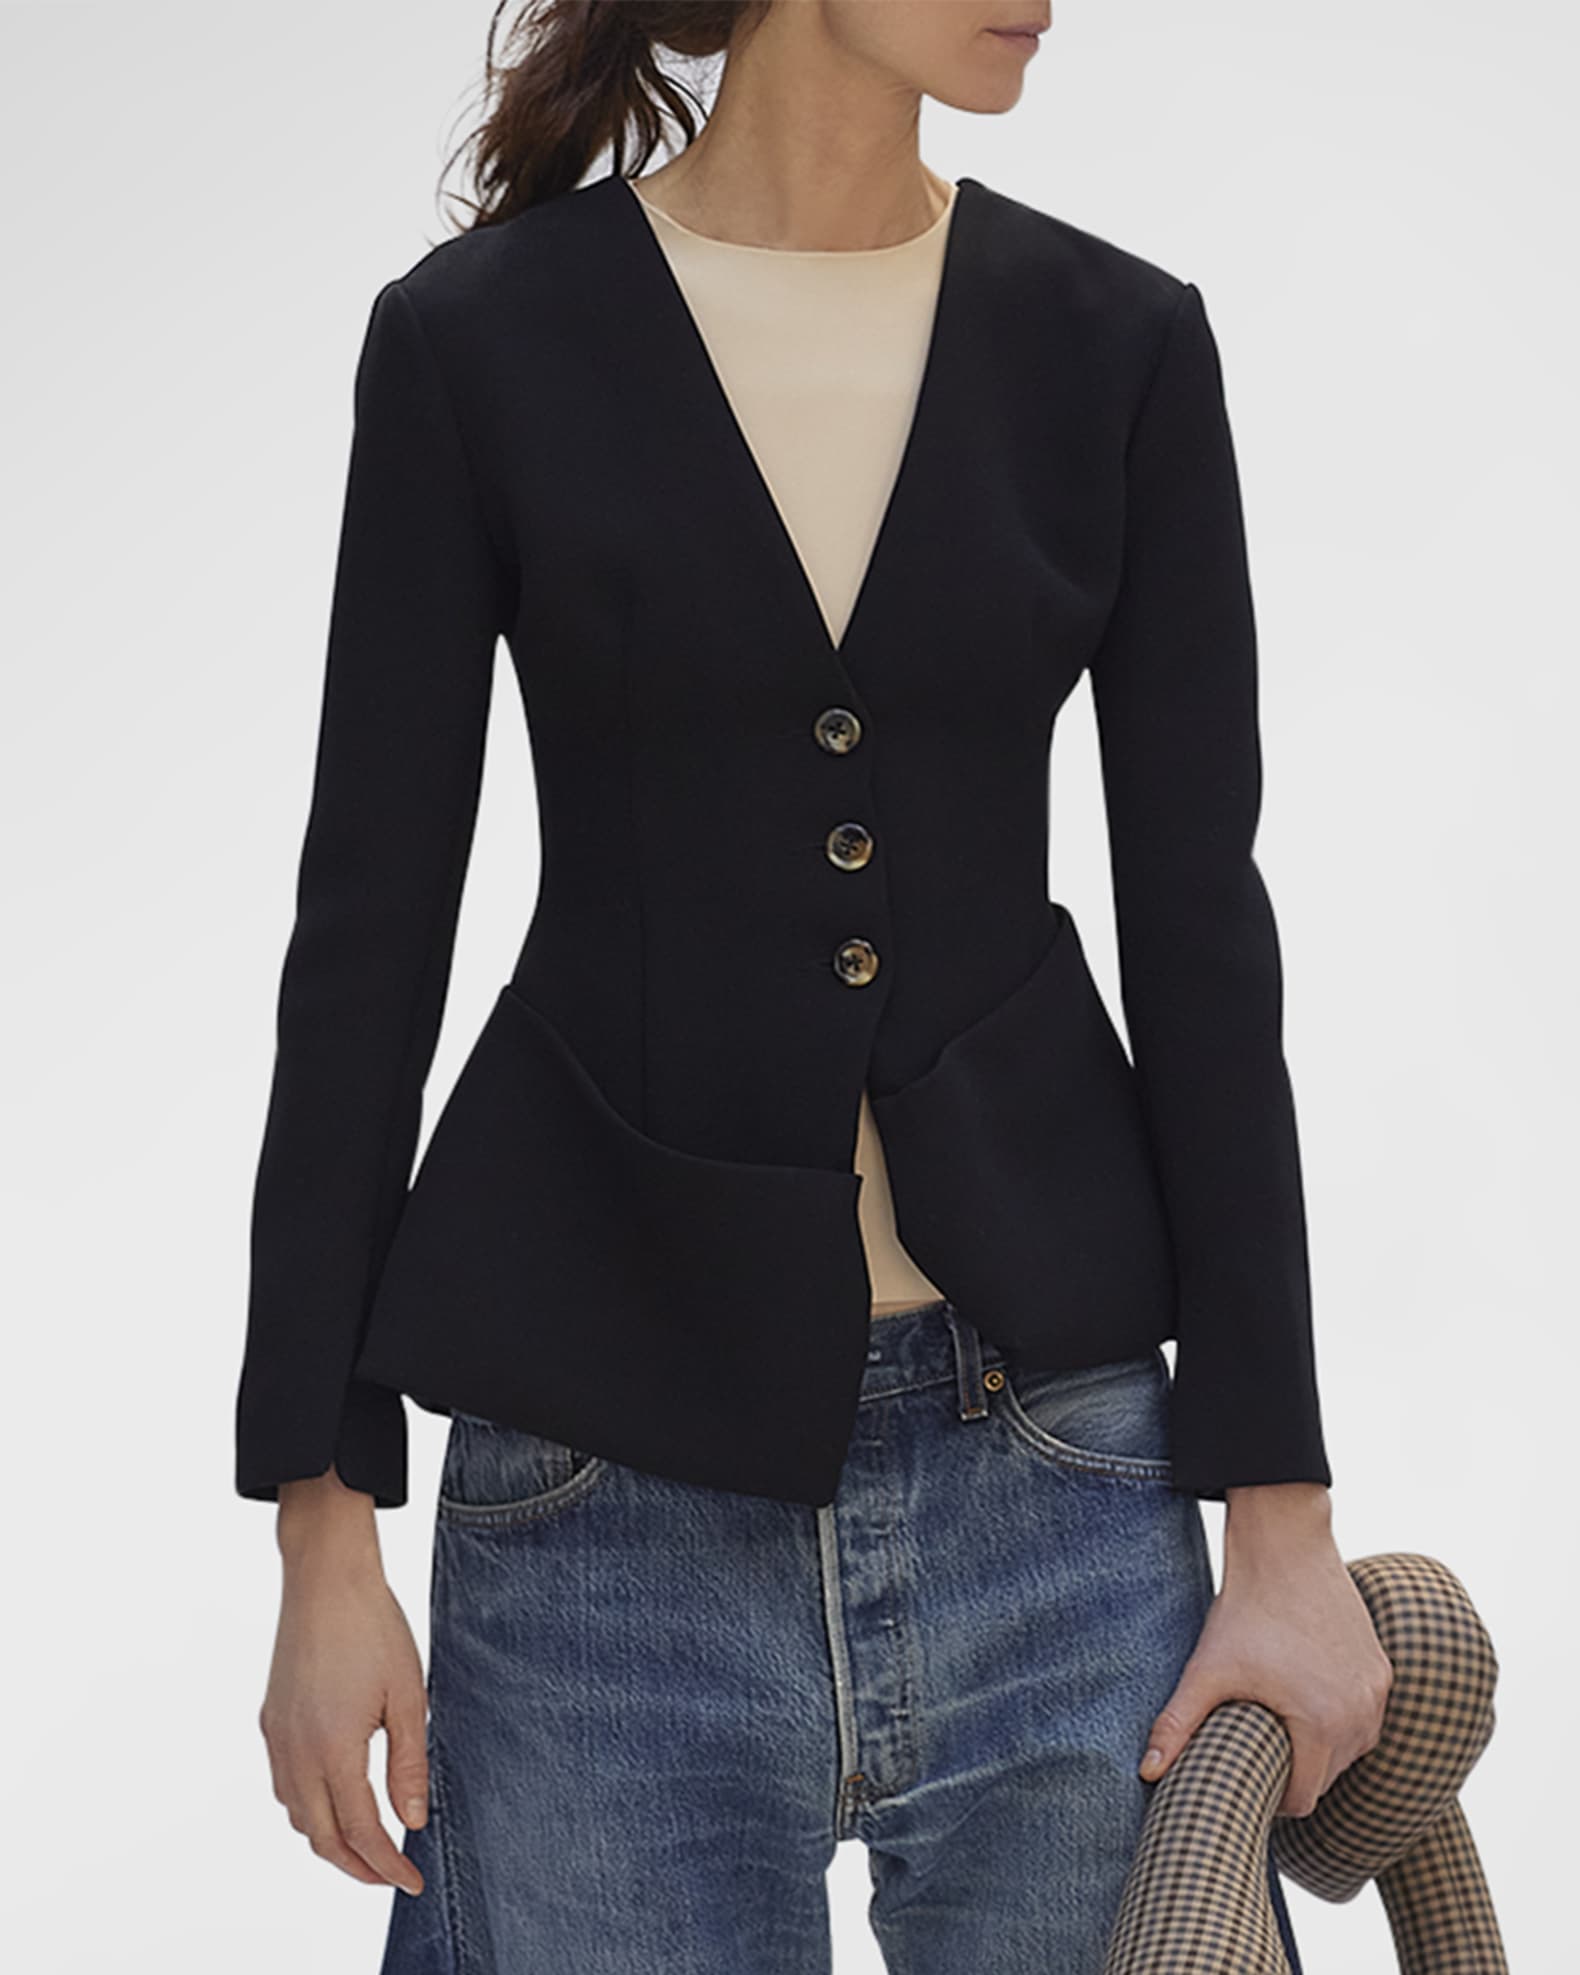 A.W.A.K.E. MODE Identical Front and Back Jacket | Neiman Marcus